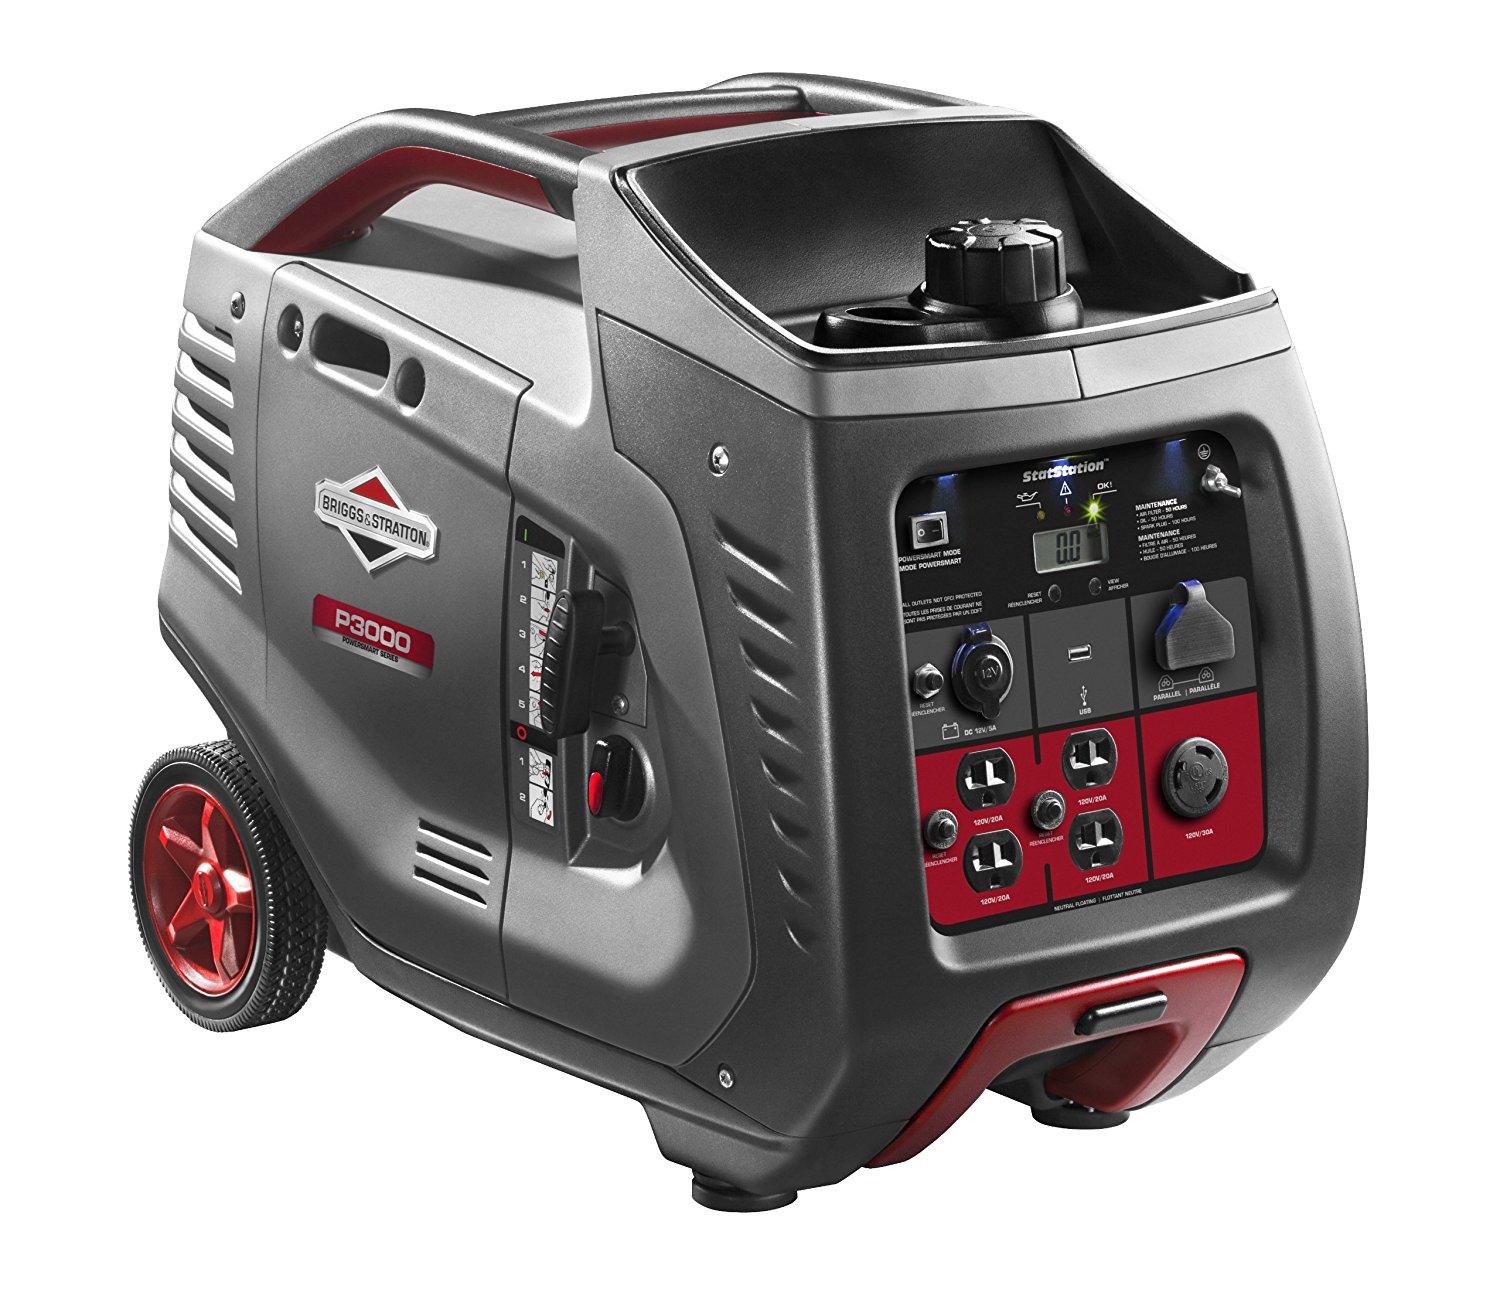 Save on a Portable Generator from Briggs & Stratton! Be prepared!